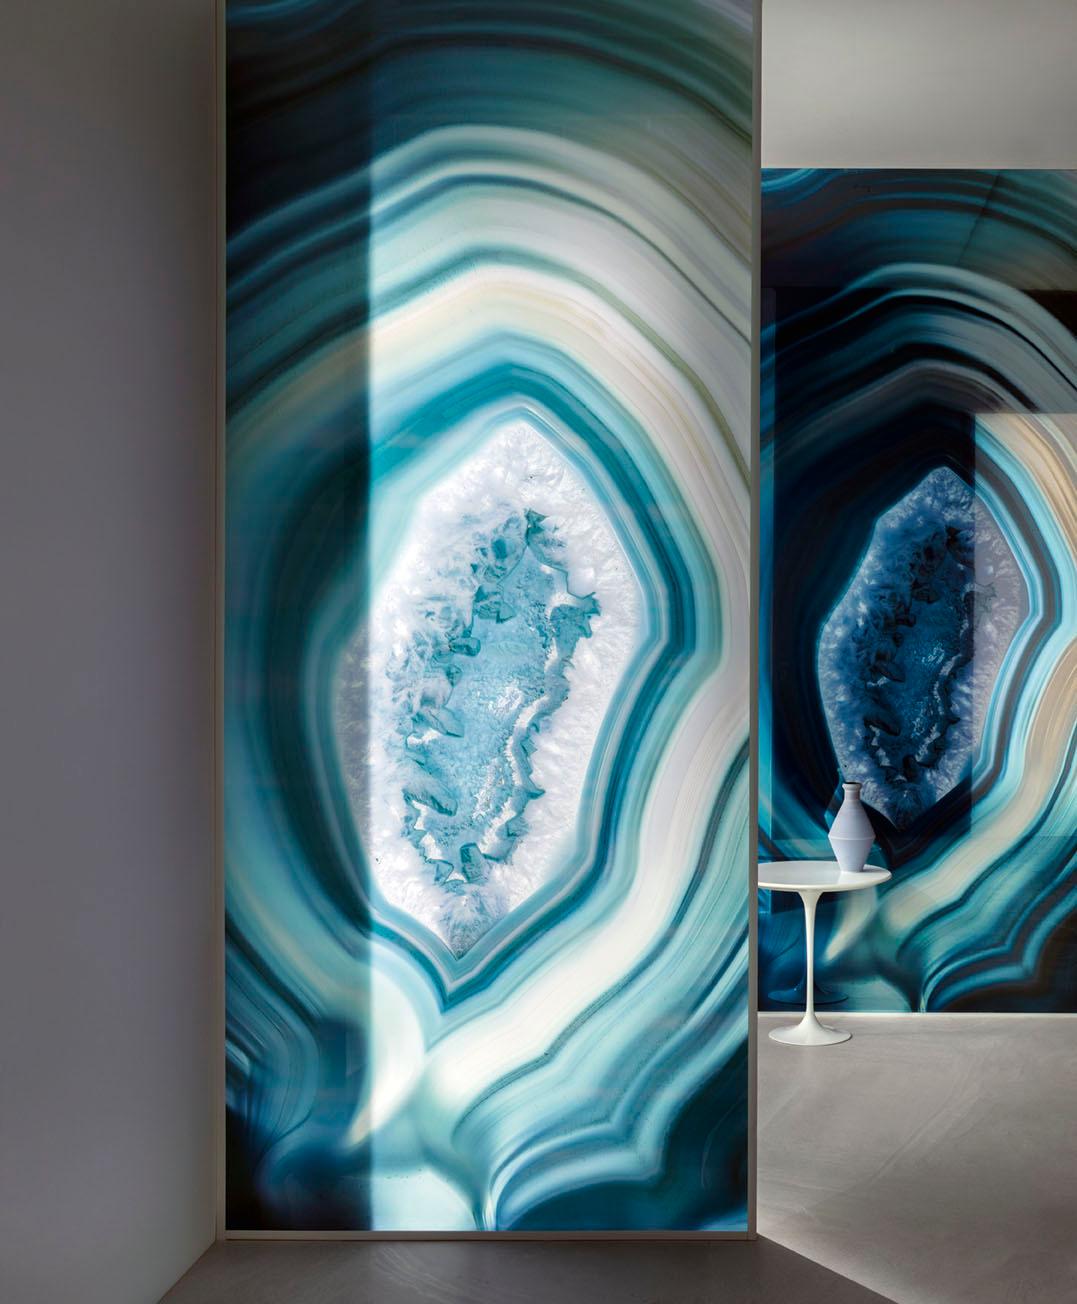 A combination of special techniques and process has created glass sheets that capture the timeless and limitless beauty of precious stones, lava rock, as well as dream landscape.
Thirteen unique looks, with swirling veins or slight ripples,